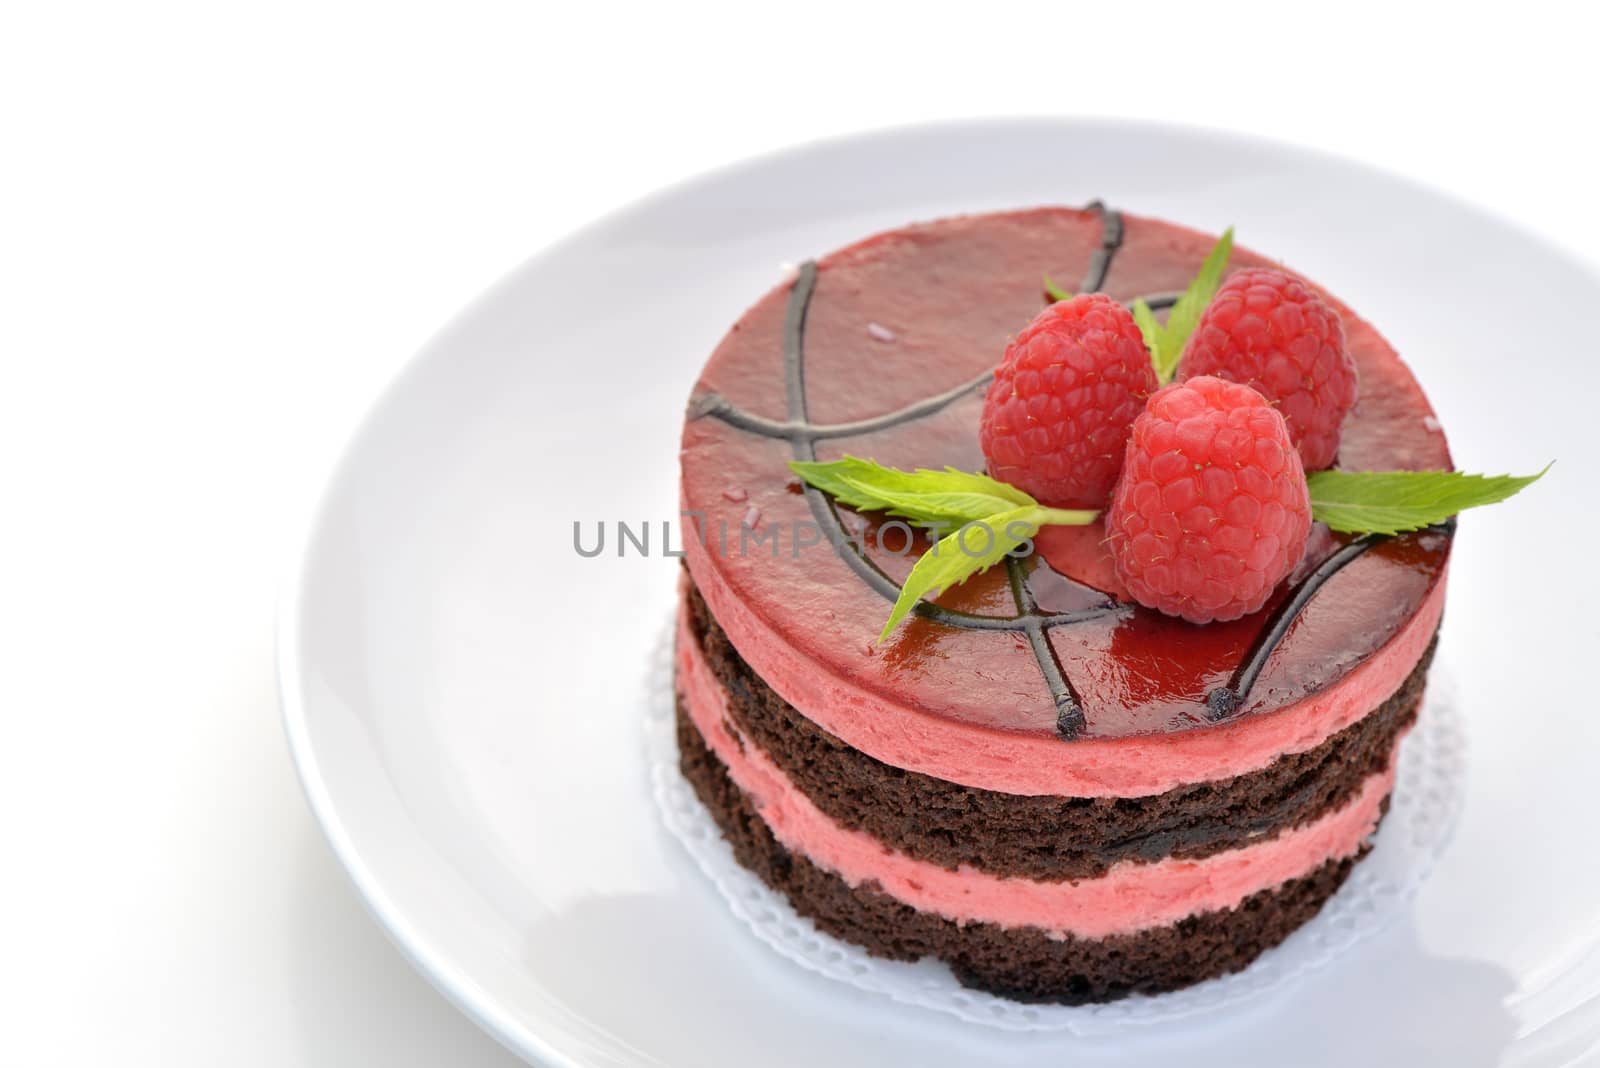 Mousse chocolate and raspberry cake by Hbak